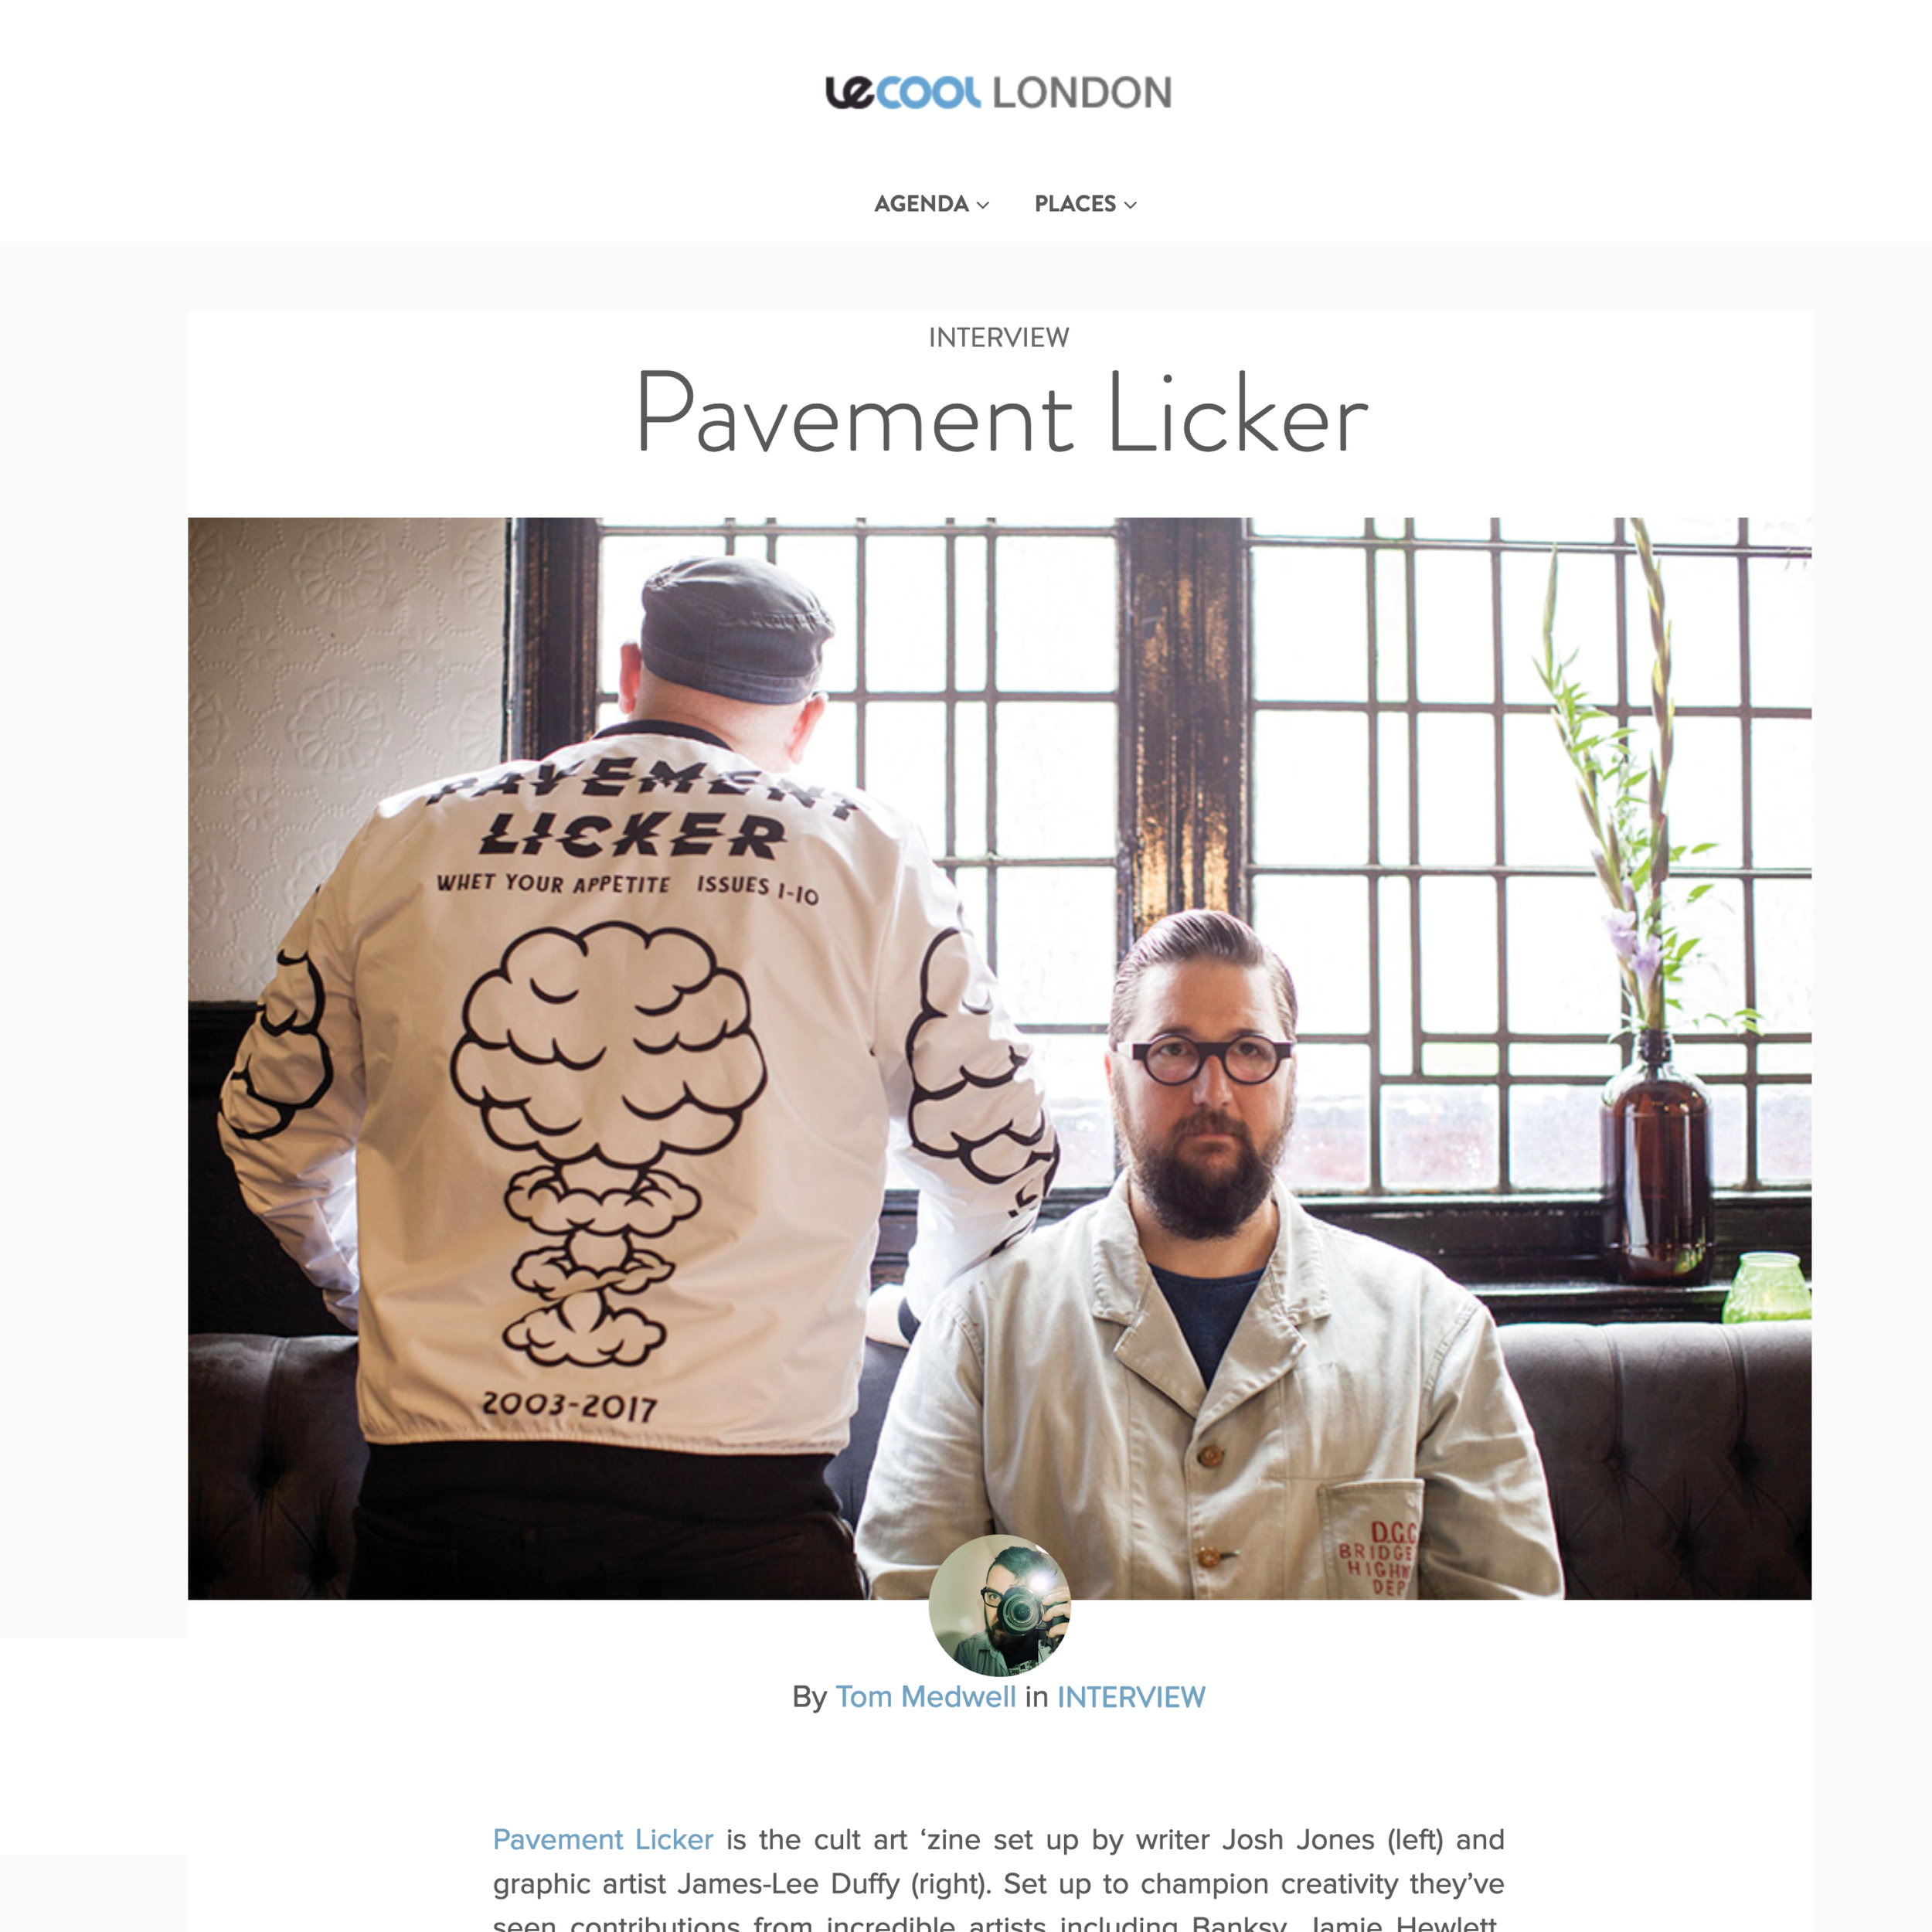 James-Lee Duffy and Josh Jones Interviewed about Pavement Licker by Le Cool London